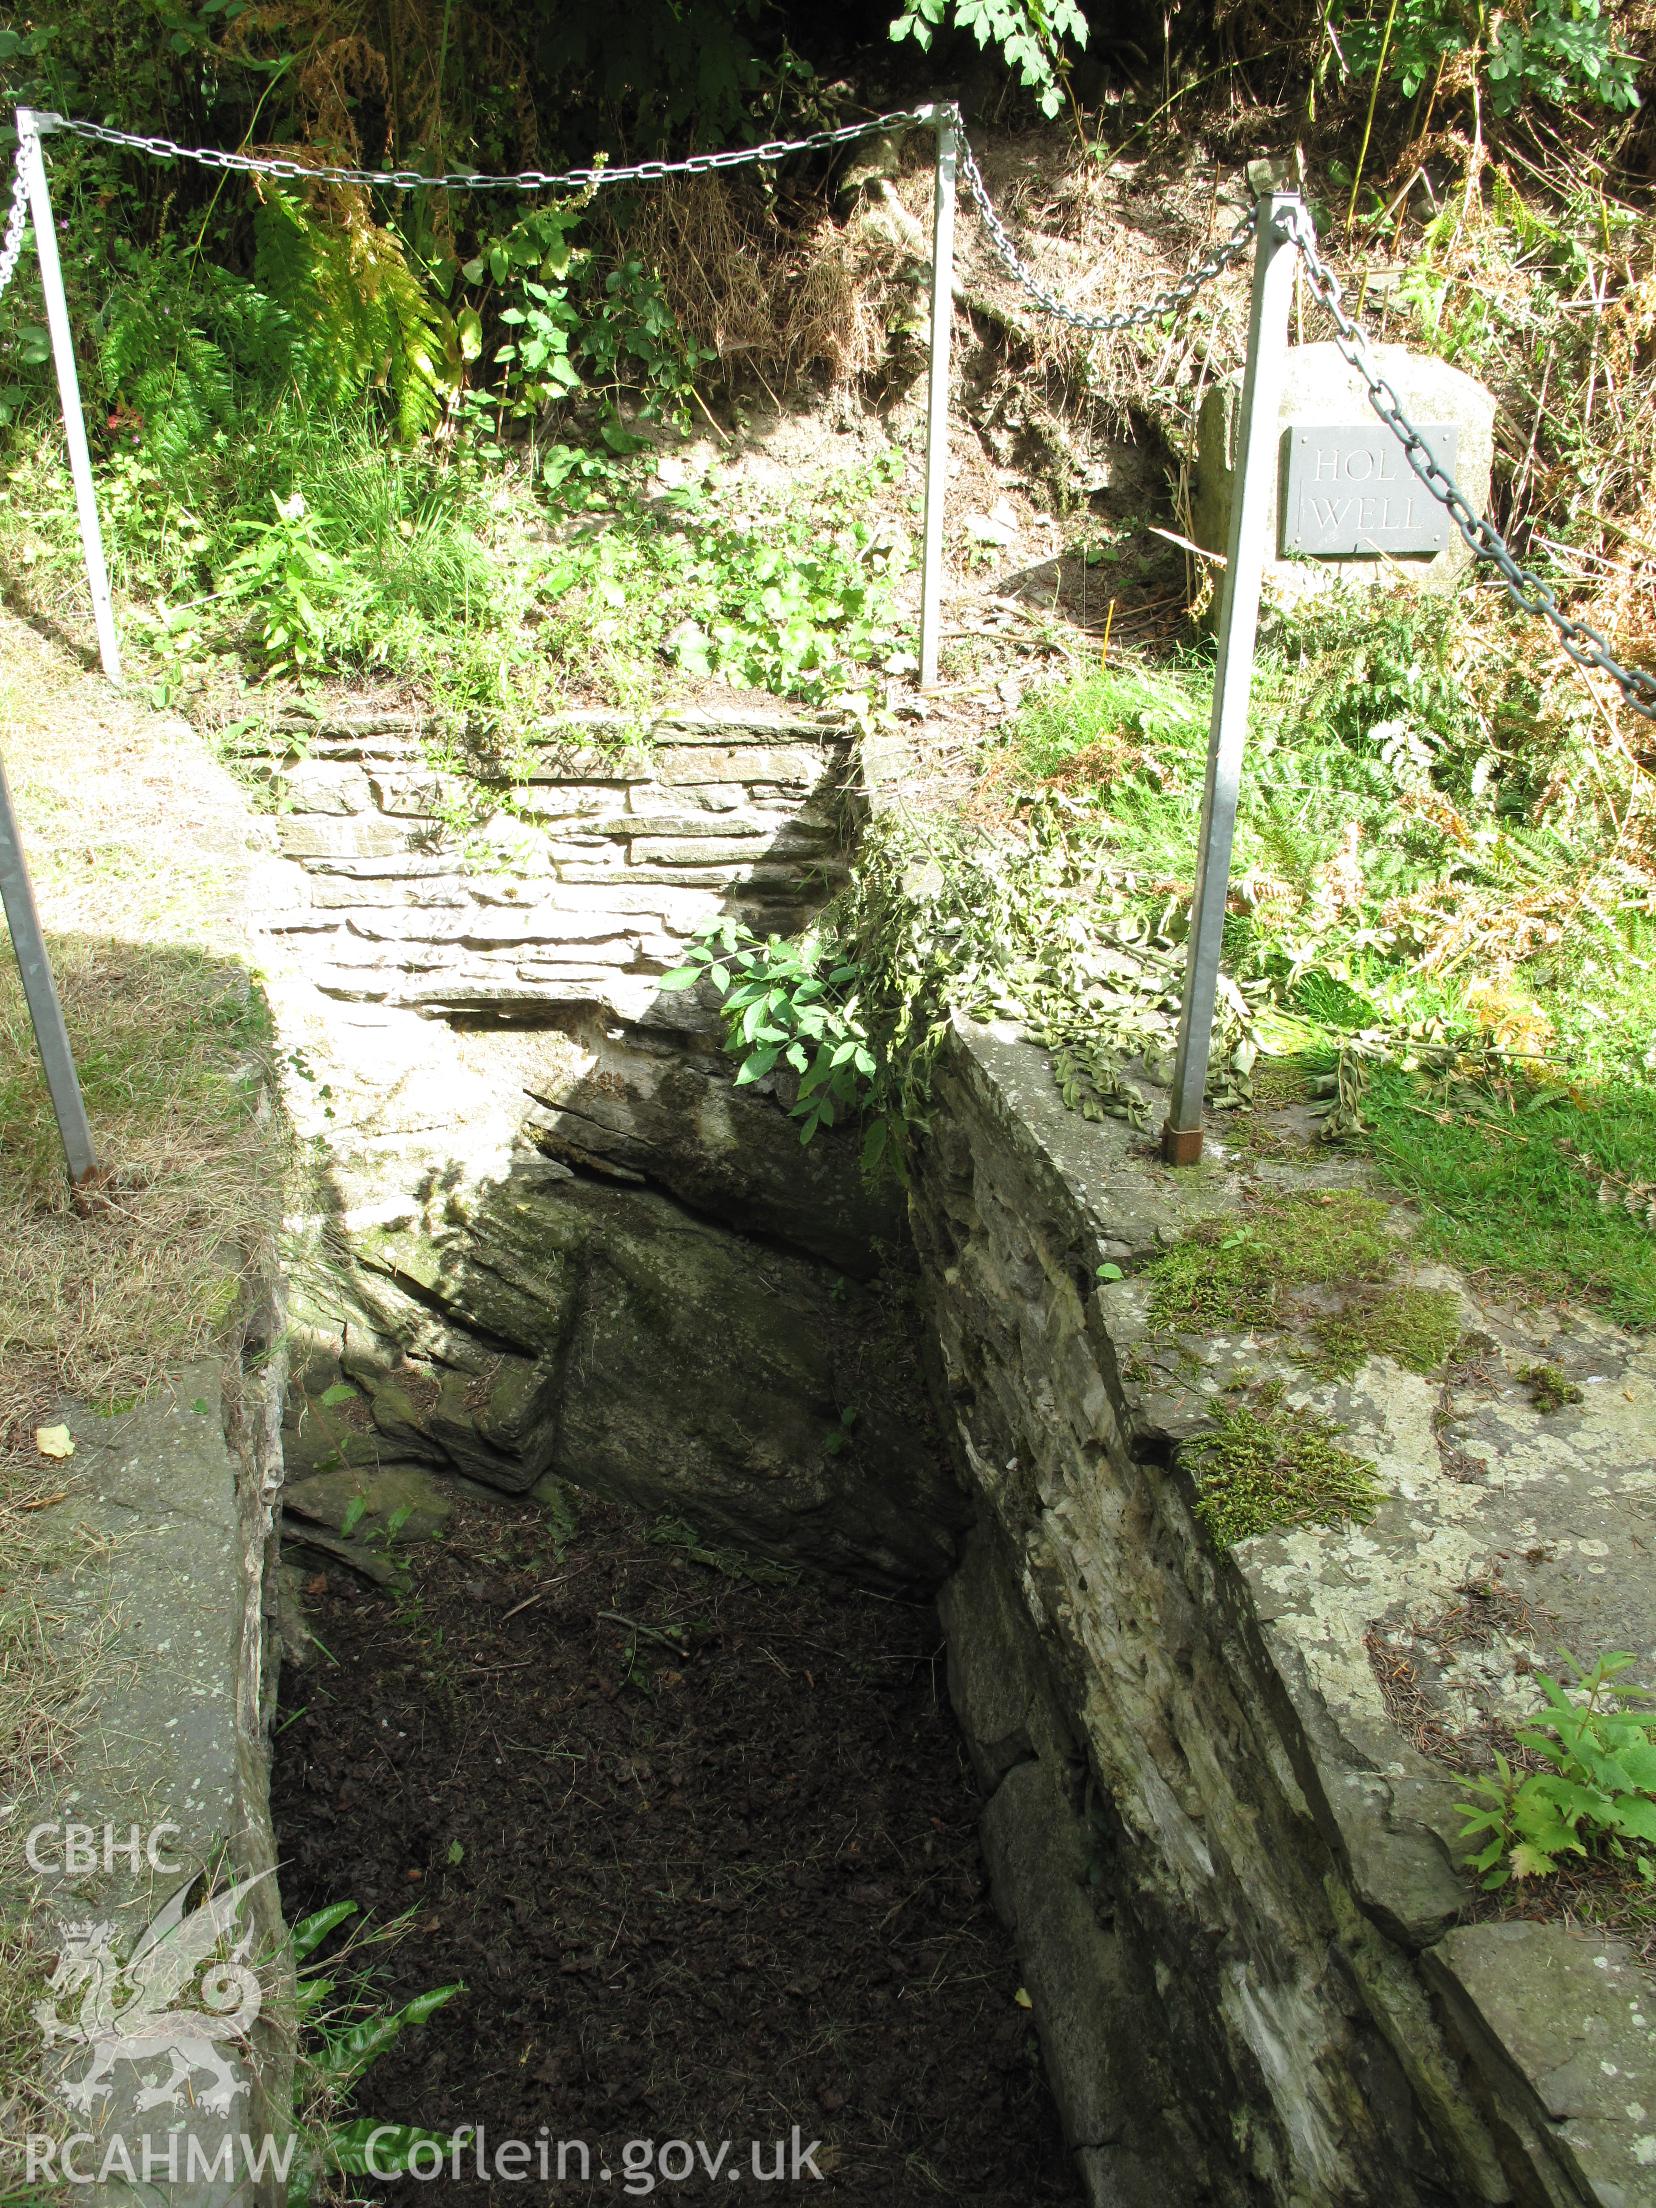 The Holy Well at St Mary's Church, Pilleth.